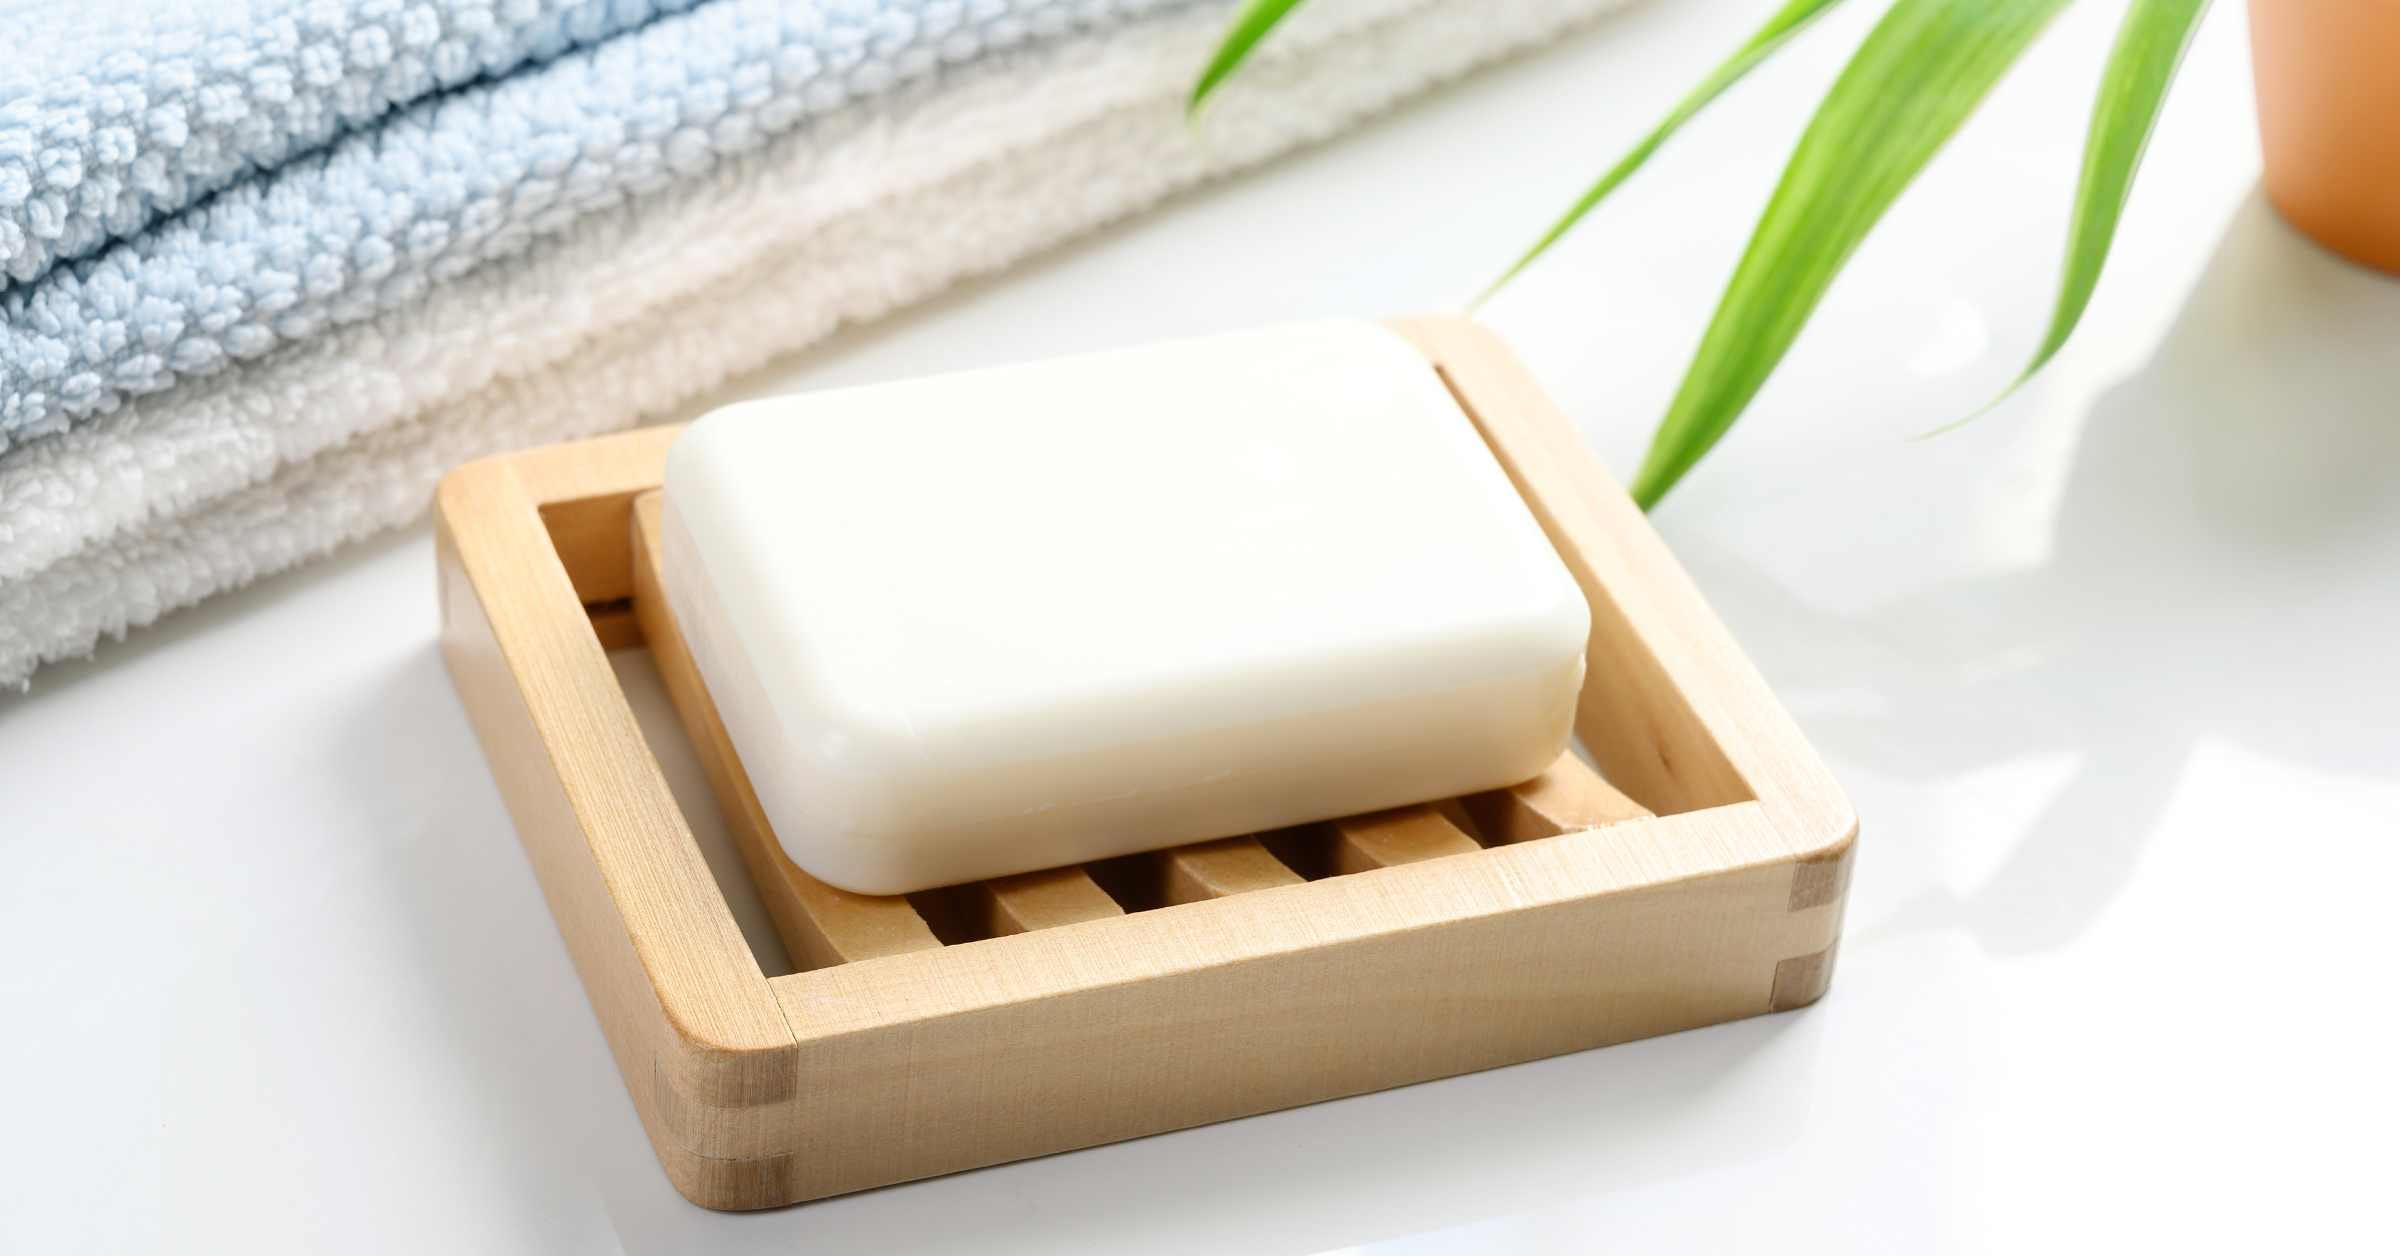 A Traveler’s Guide: Can You Take Bar Soap on a Plane-